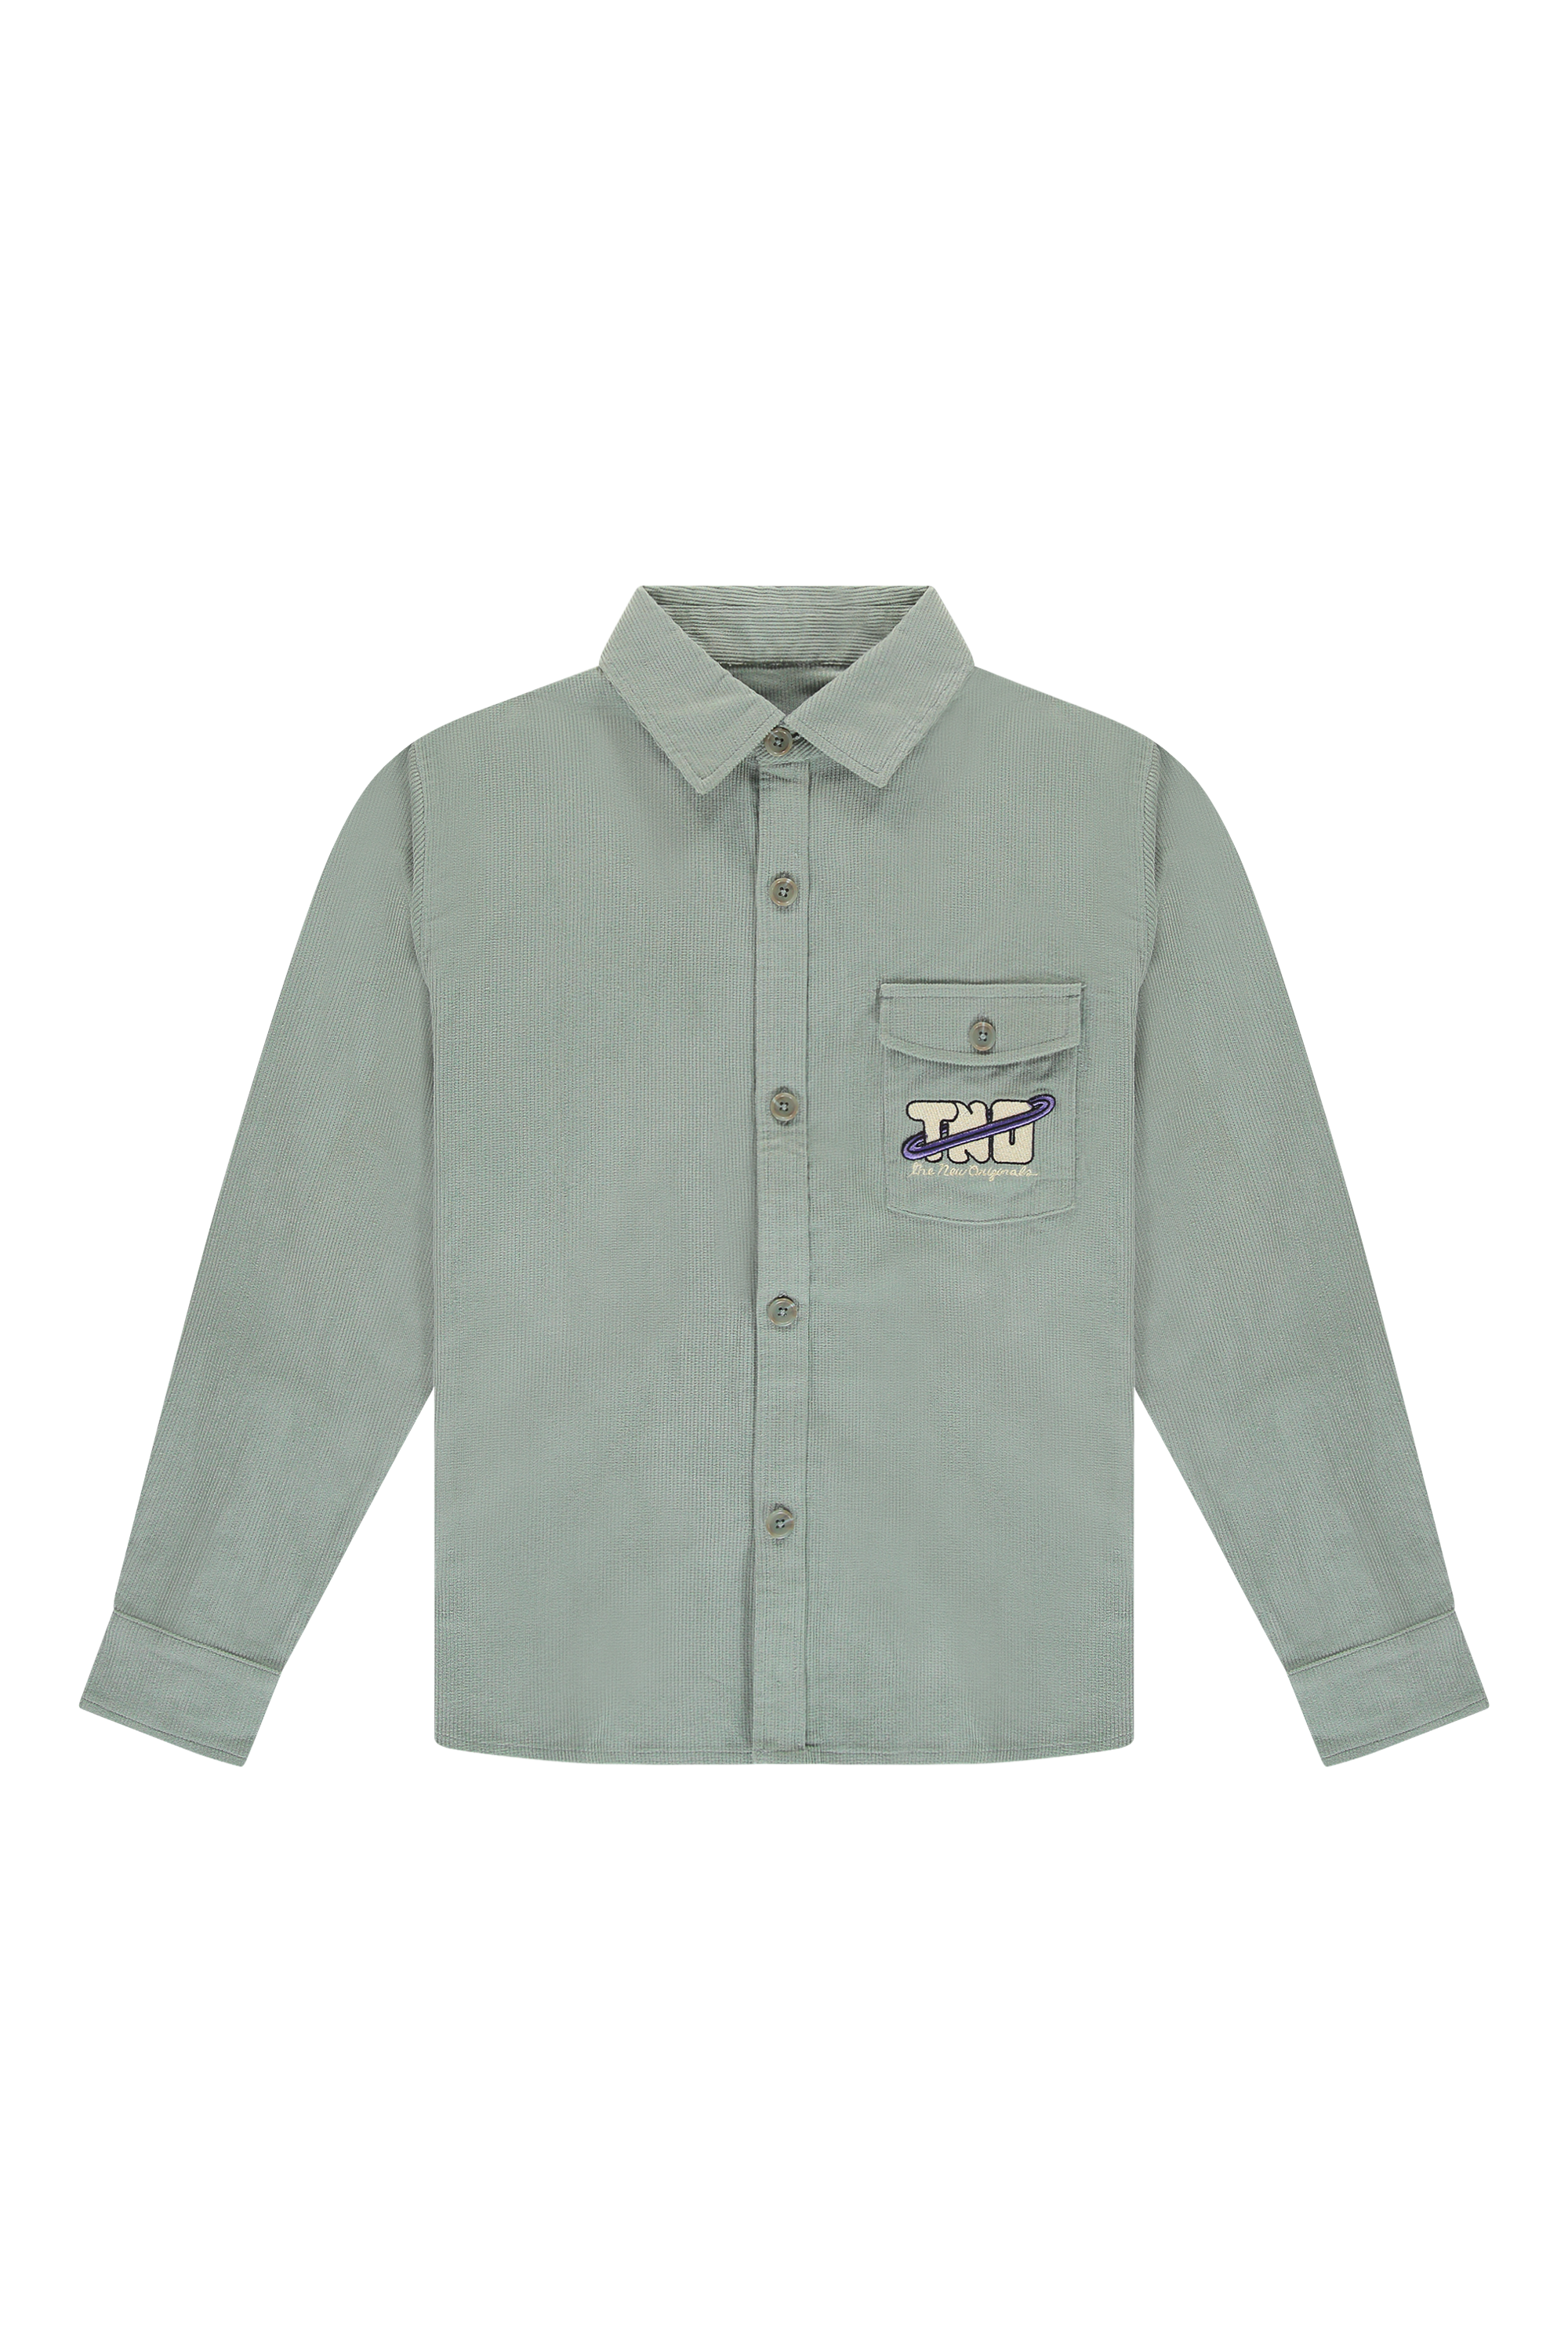 products-overshirt_blue_front-png